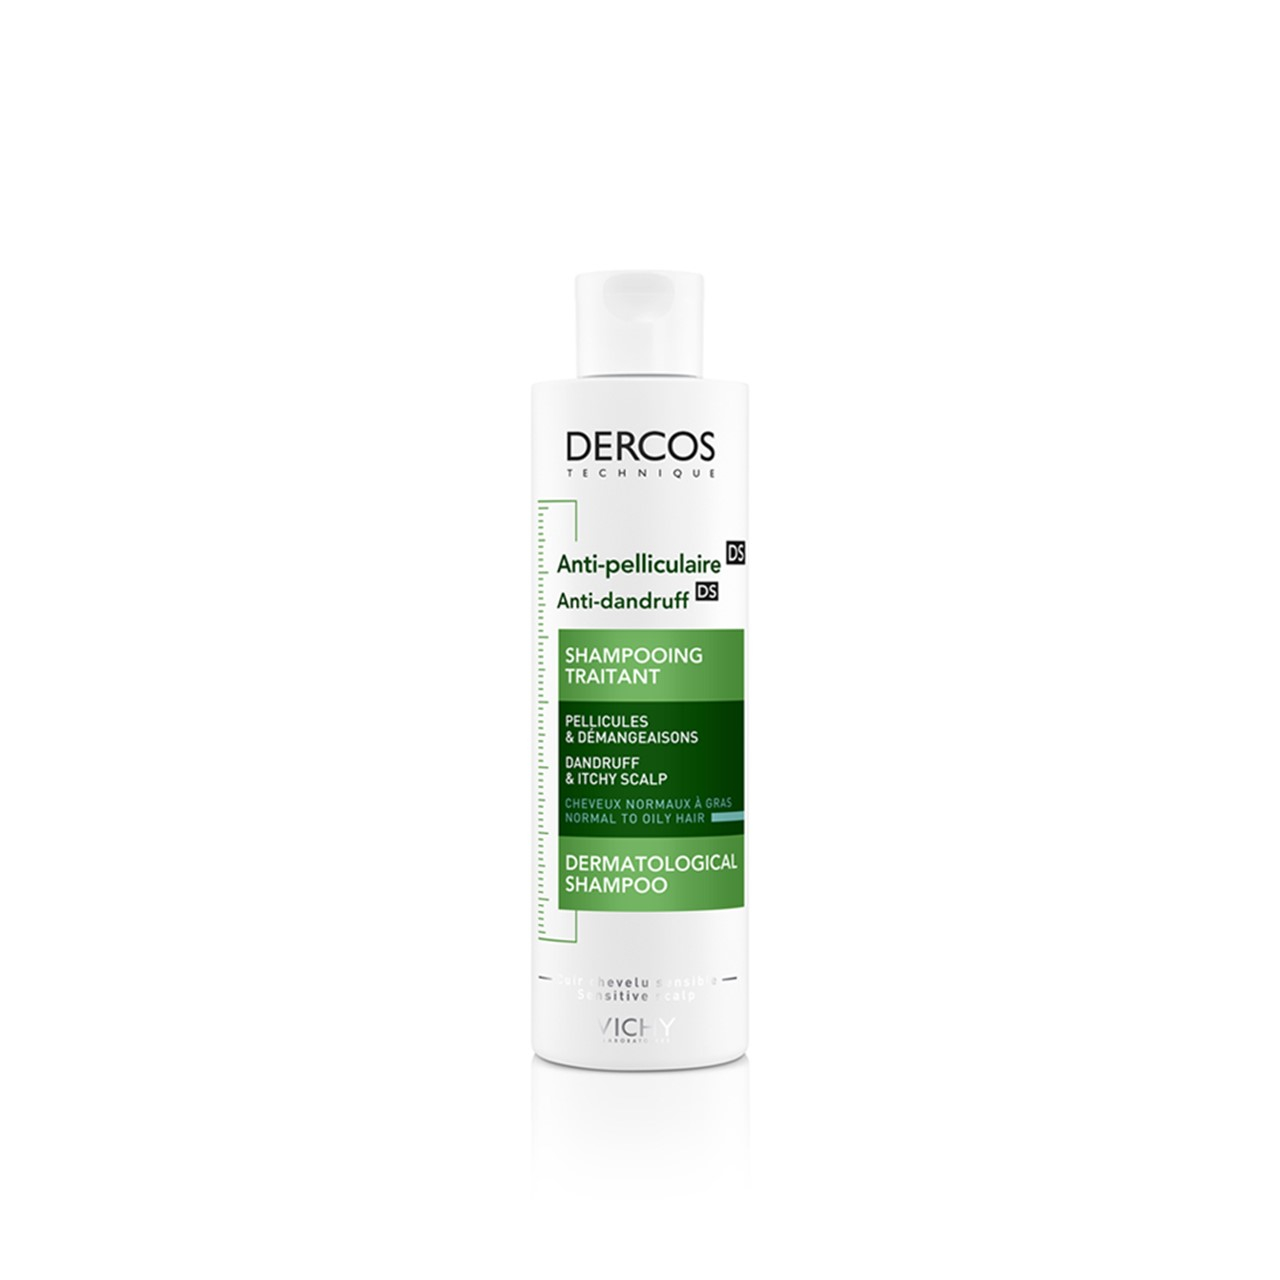 Vichy Dercos Anti-Dandruff DS Shampoo for Normal to Oily Hair